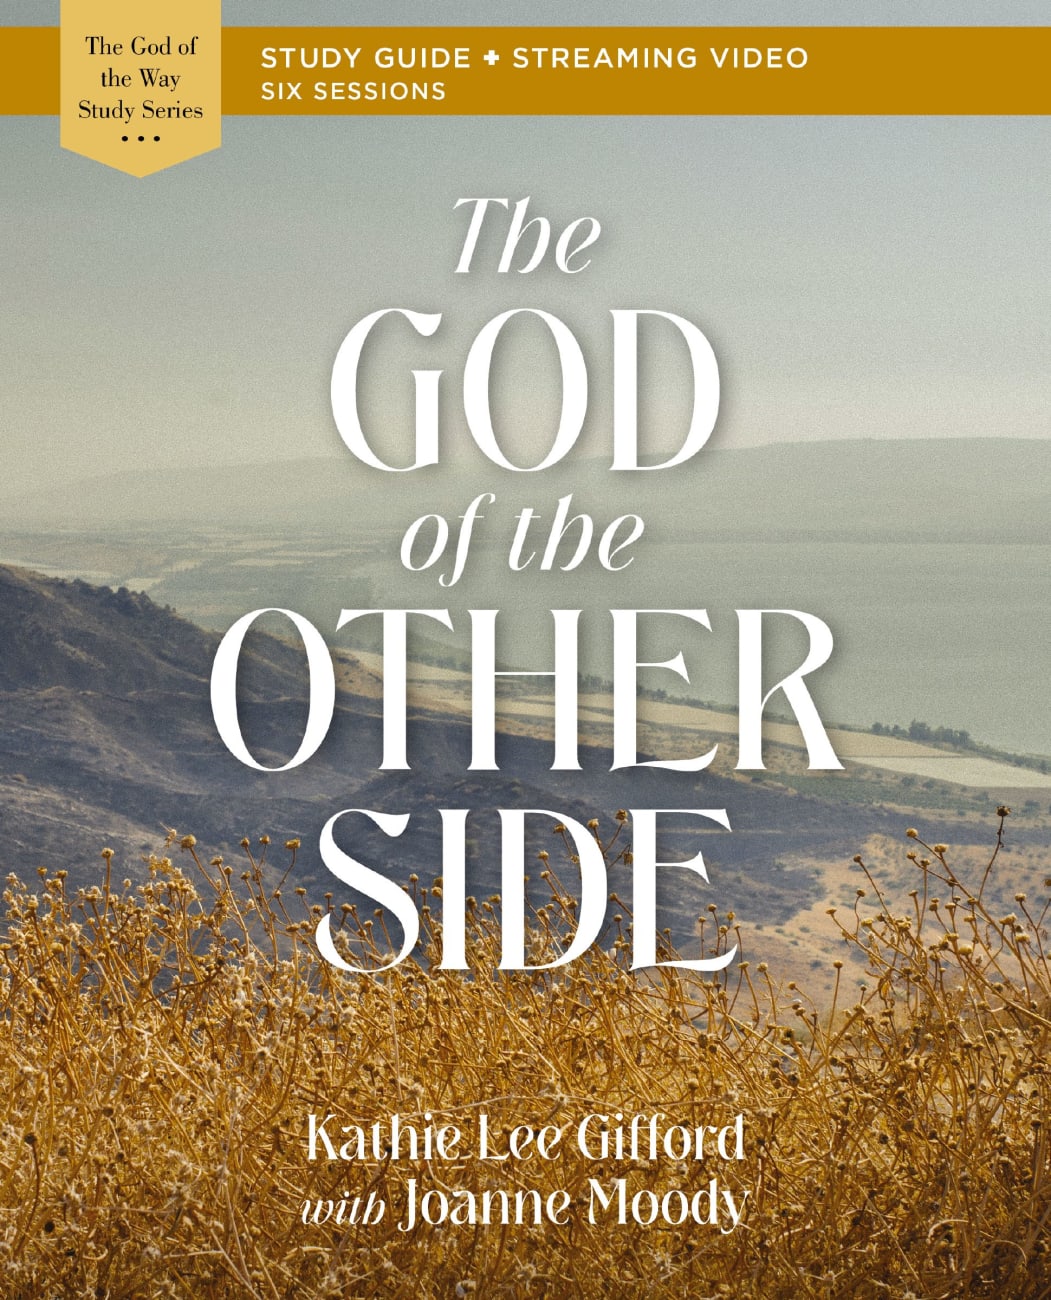 God of the Other Side Bible Study Guide Plus Streaming Video (God Of The Way Series) Paperback